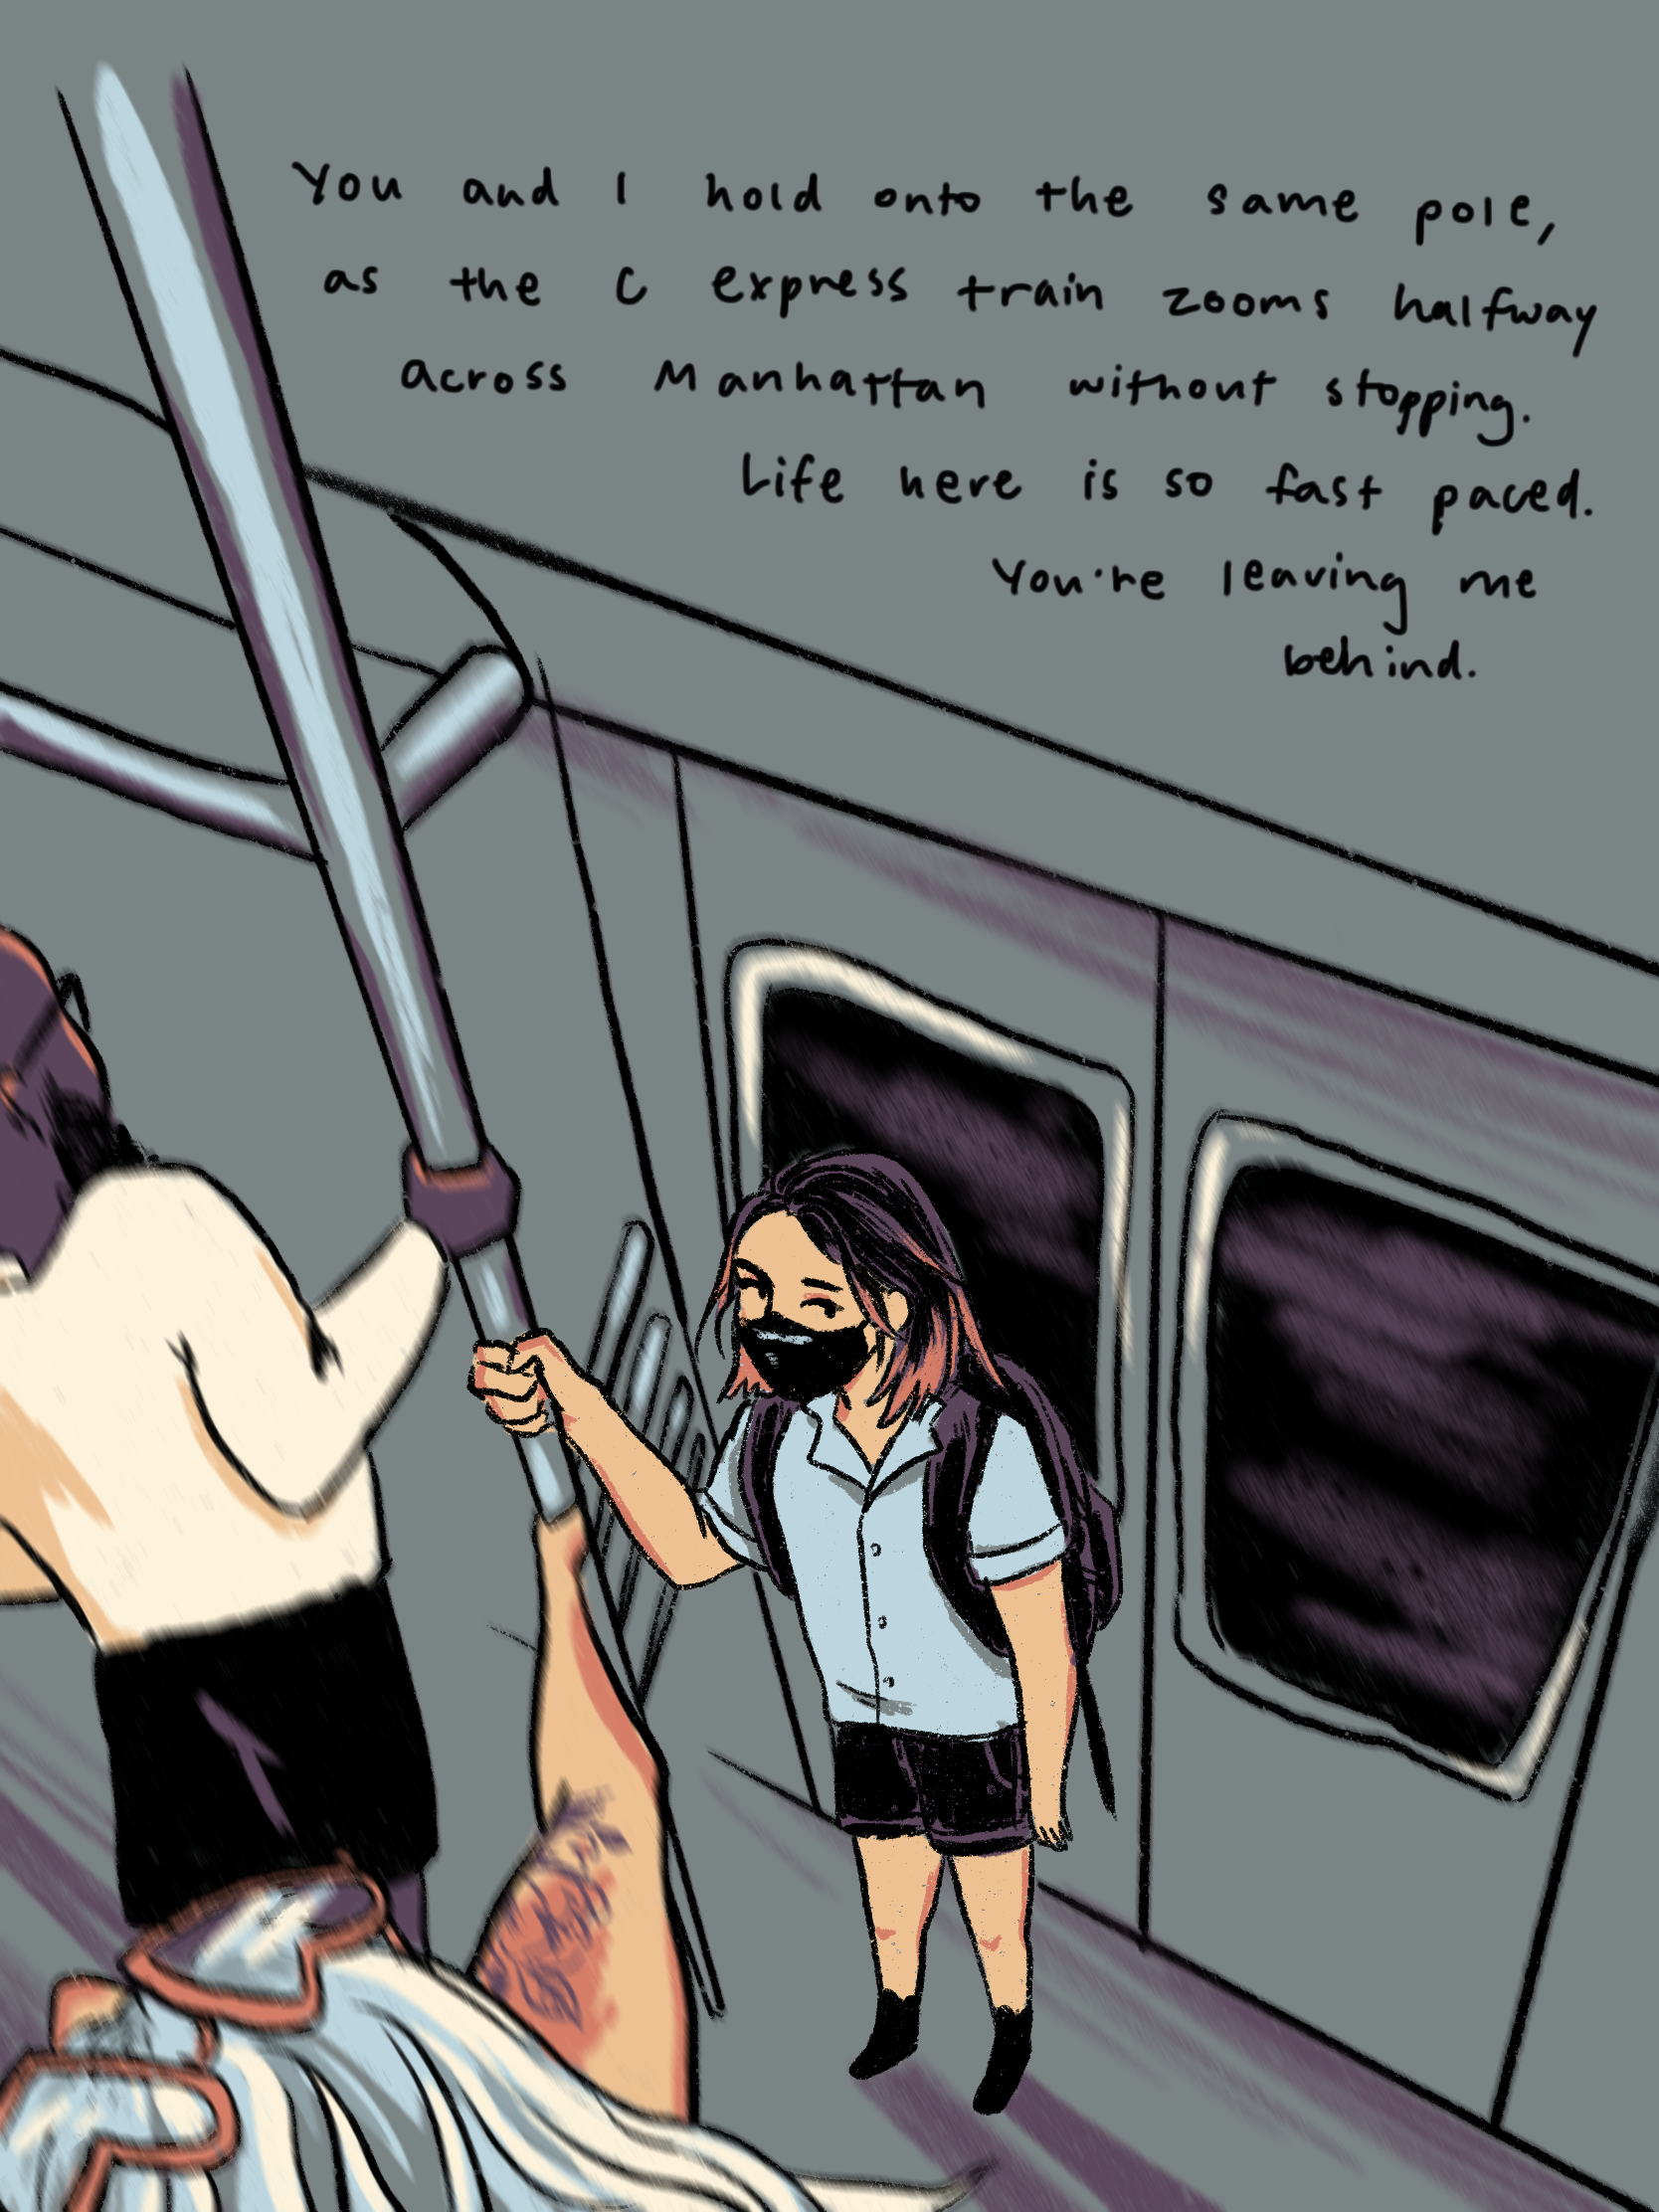 drawing of me and two strangers holding onto the subway pole. text reads: you and i hold onto the same pole, as the C express train zooms halfway across Manhattan without stopping. Life here is so fast paced. Youre leaving me behind. 